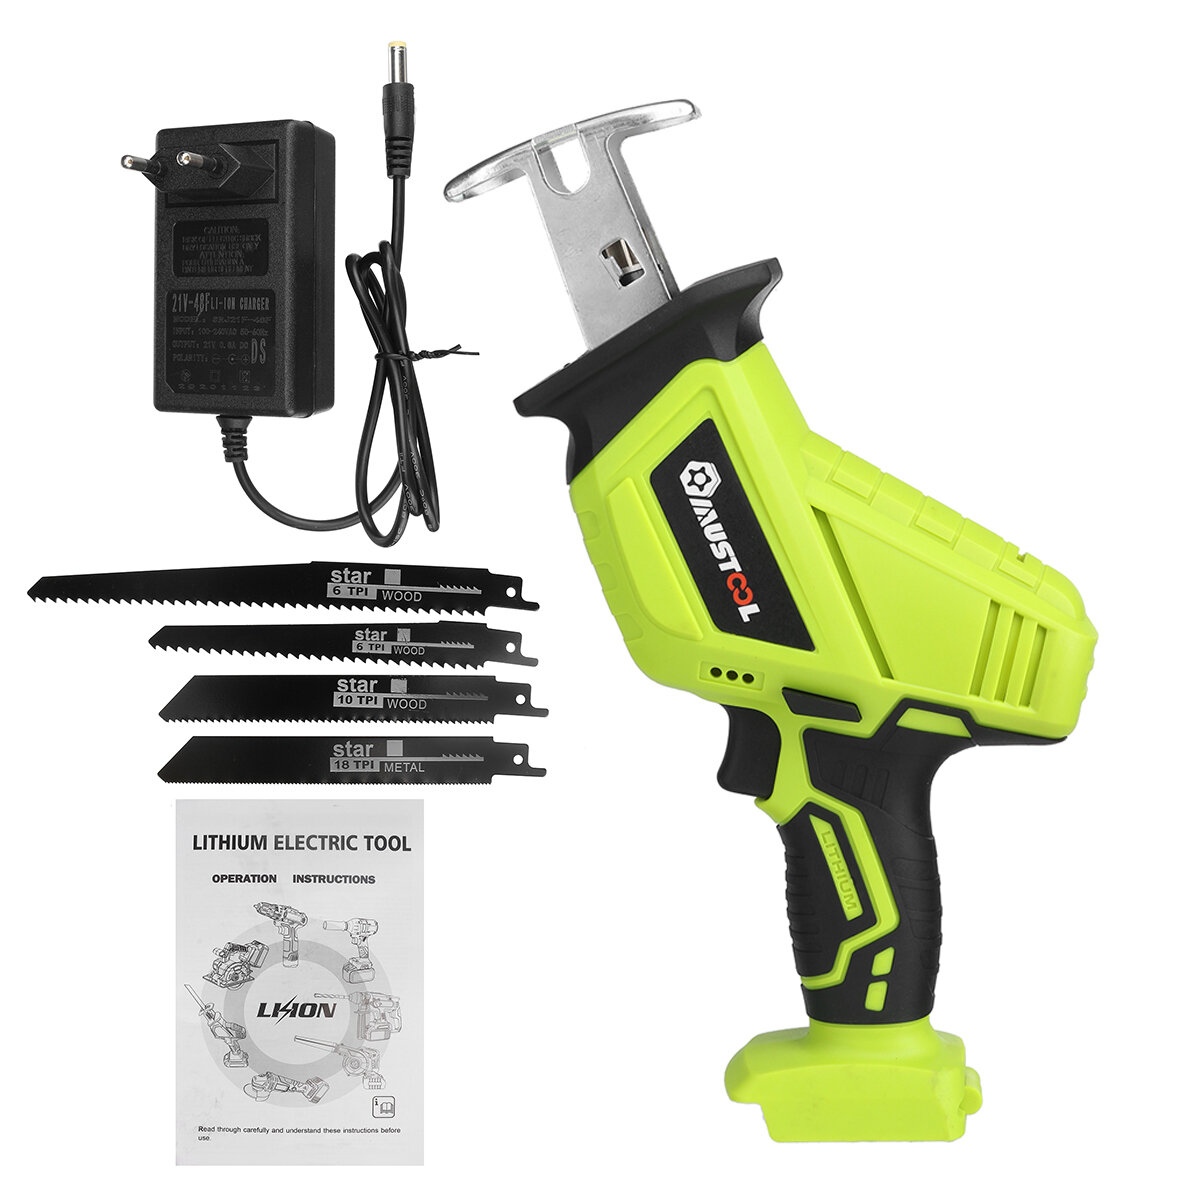 

9000mAh 88VLithium-Ion Electric Saw Cordless Reciprocating Saw Rechargeable with 4 Blades